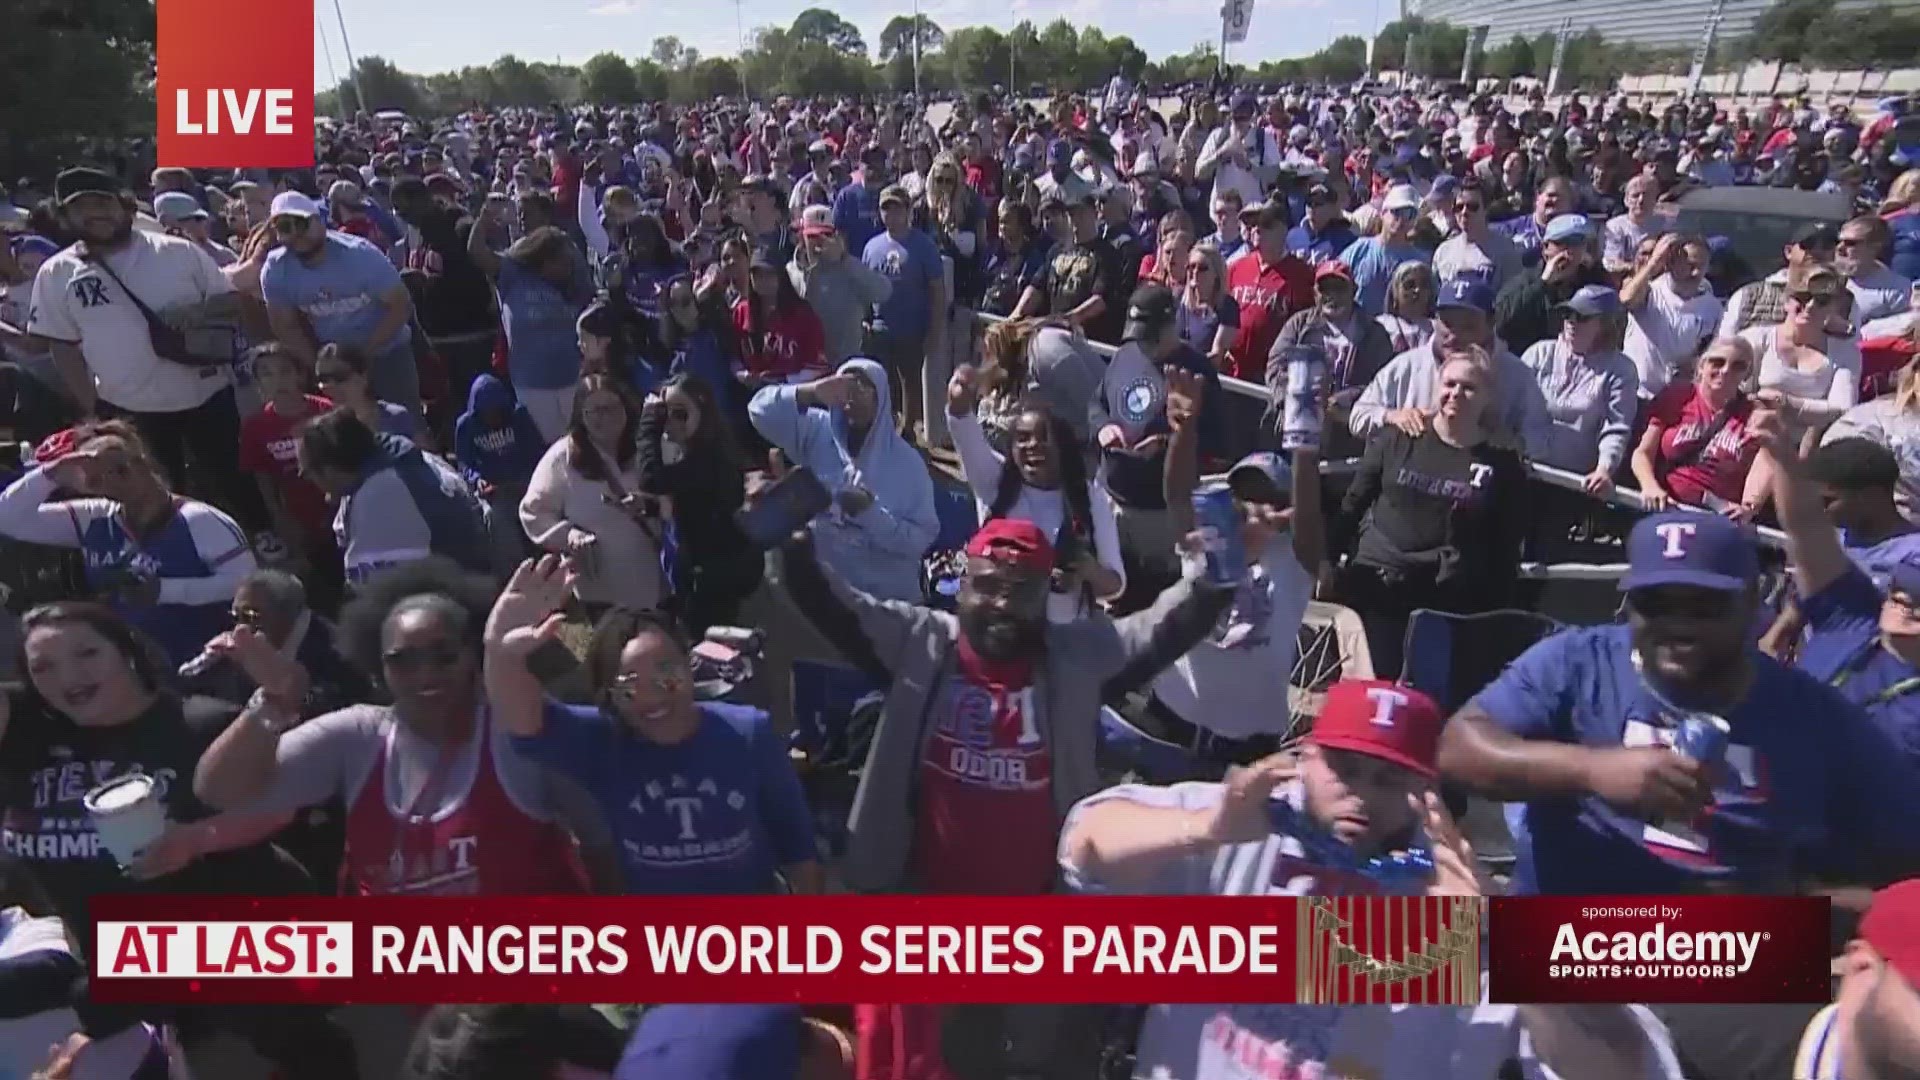 The Arlington Fire Department said about 500,000-700,000 people are at the 2023 Texas Rangers World Series championship parade.